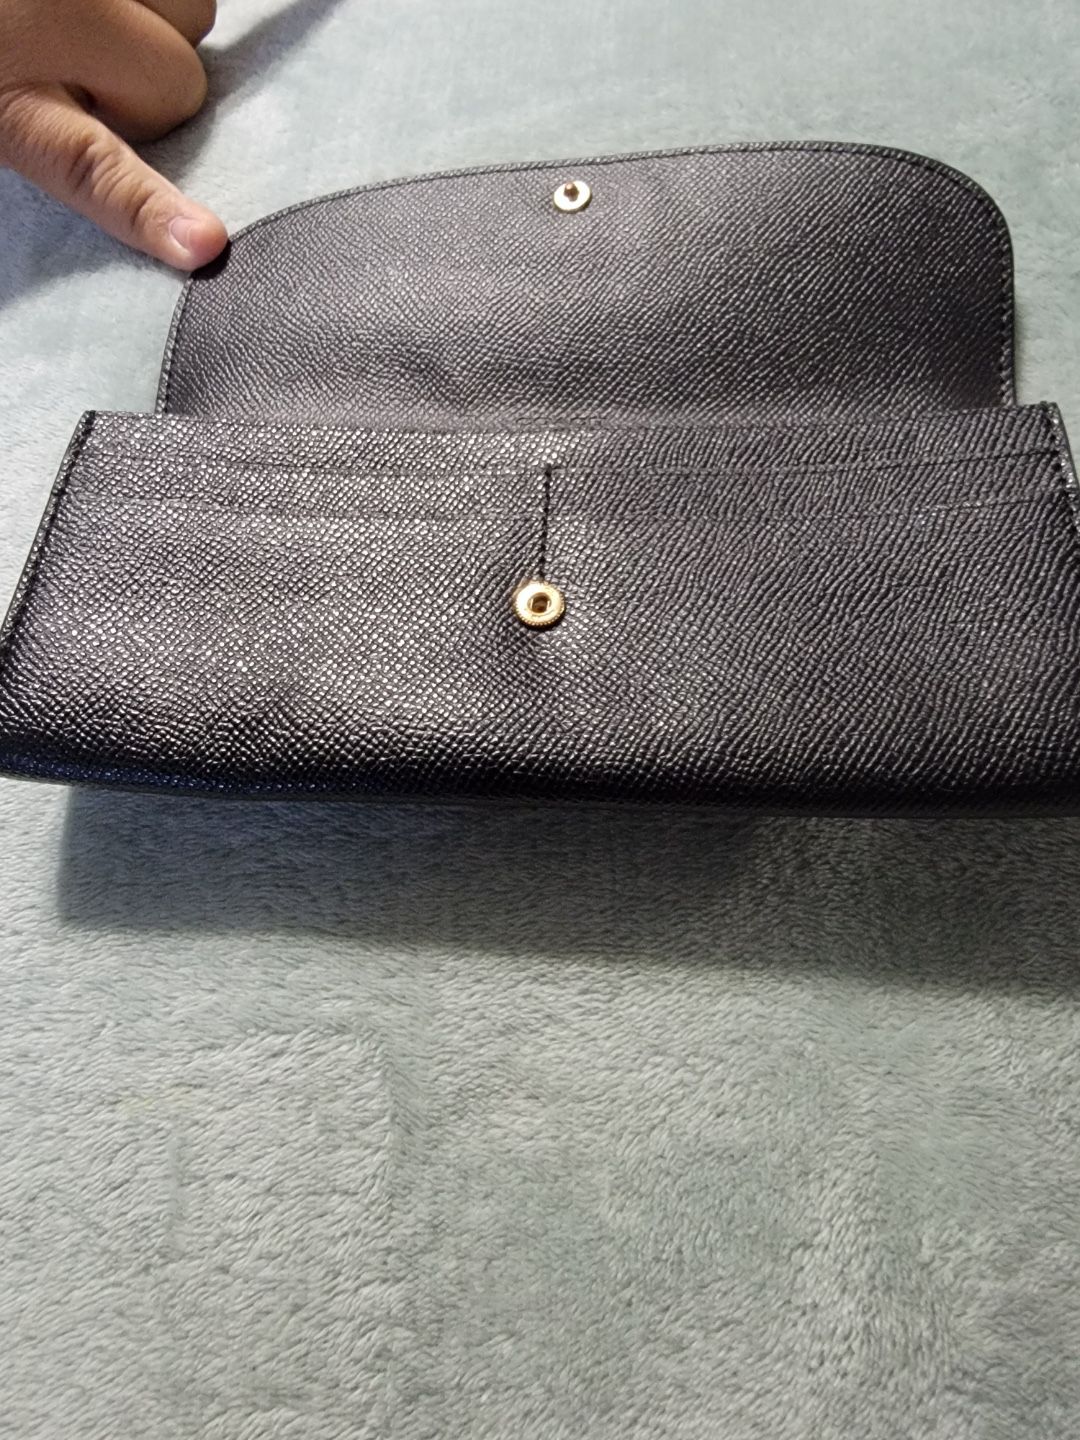 Coach Wallet In Excellent Condition